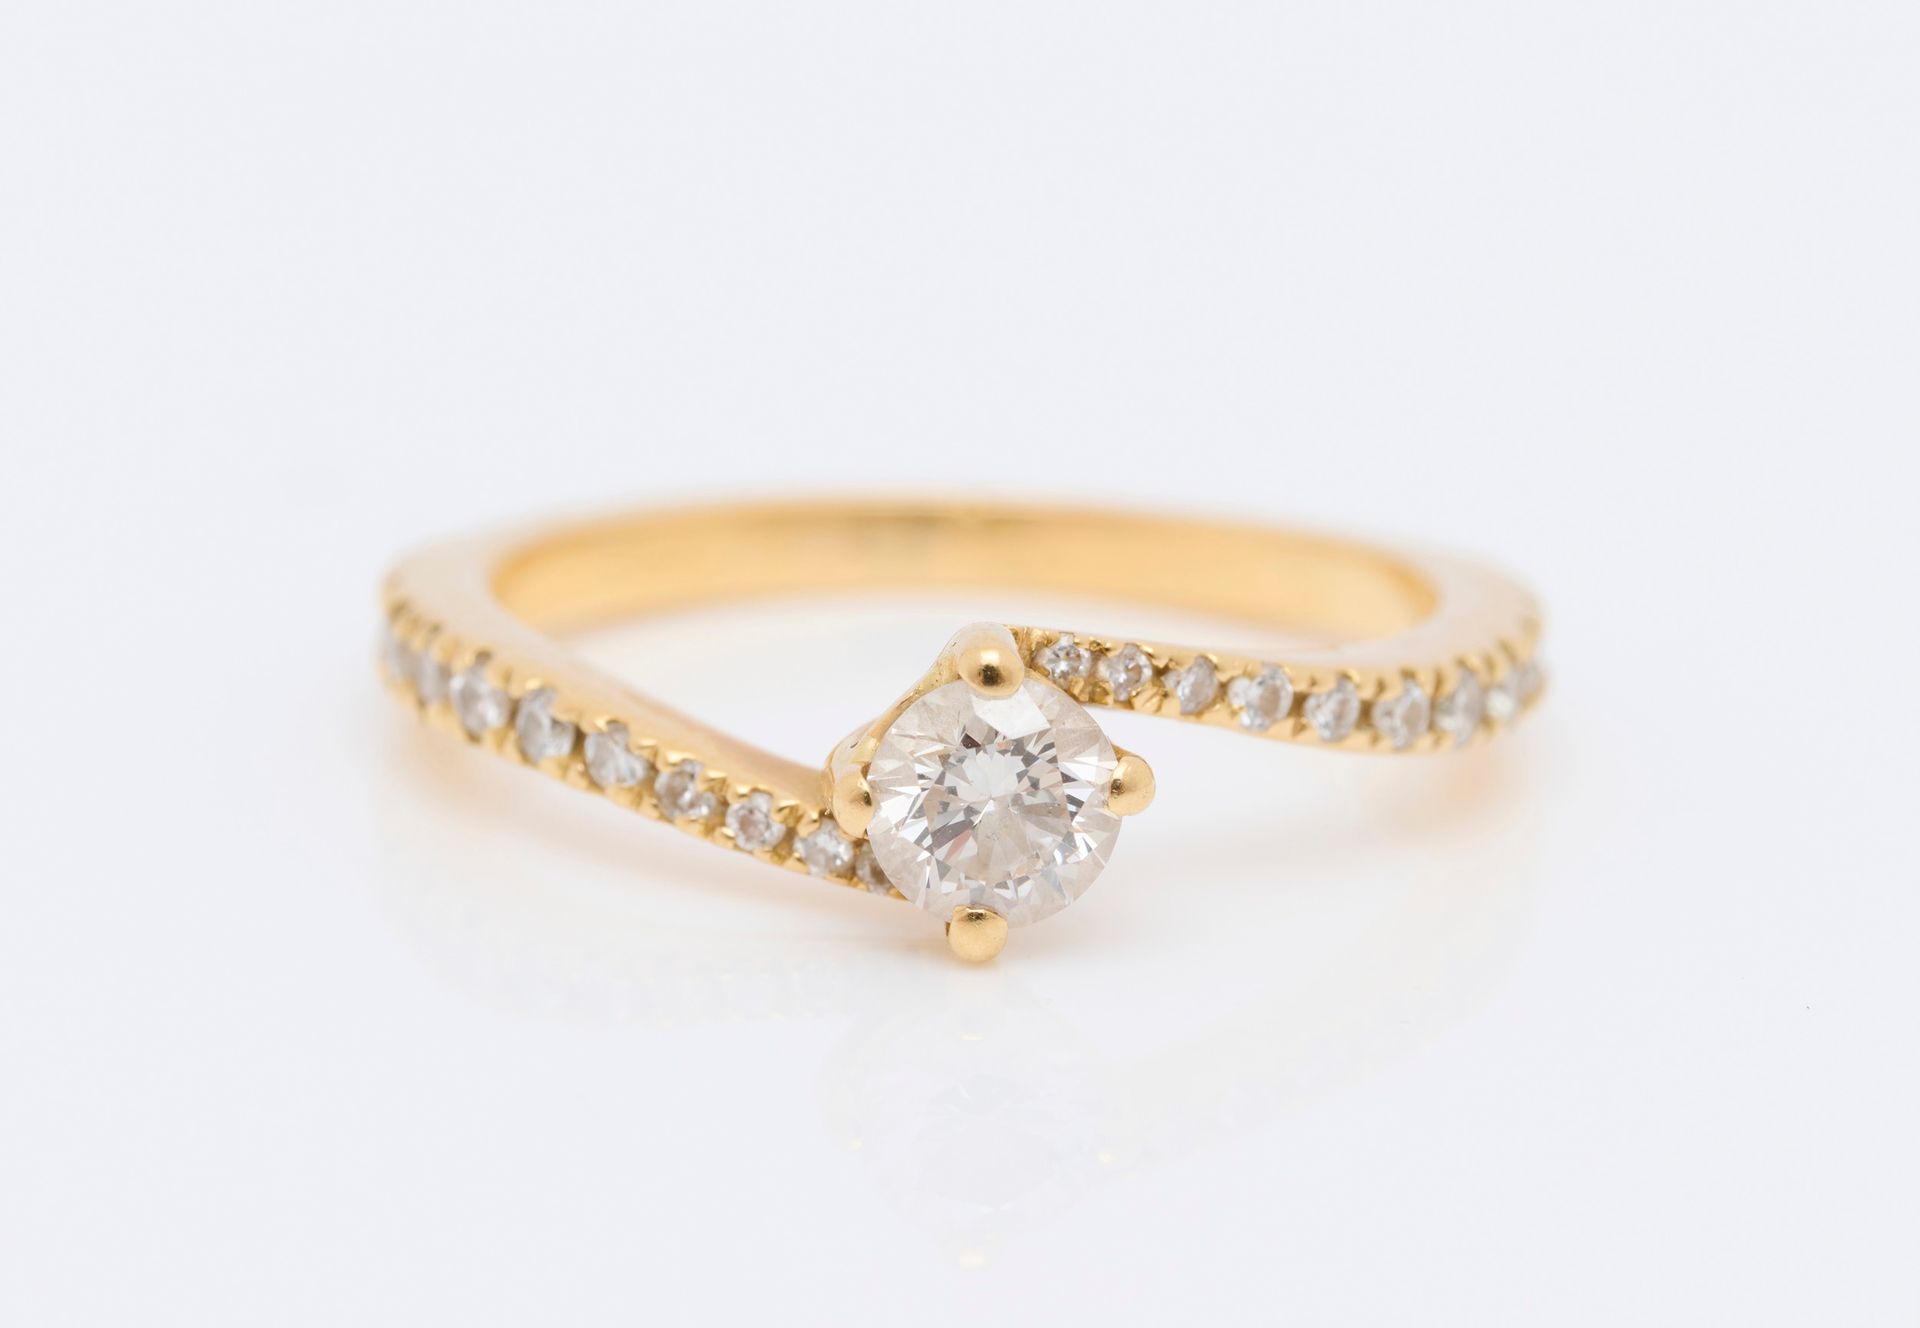 Bague Solitaire ring in 18K yellow gold (750/000) set with a brilliant-cut diamo&hellip;